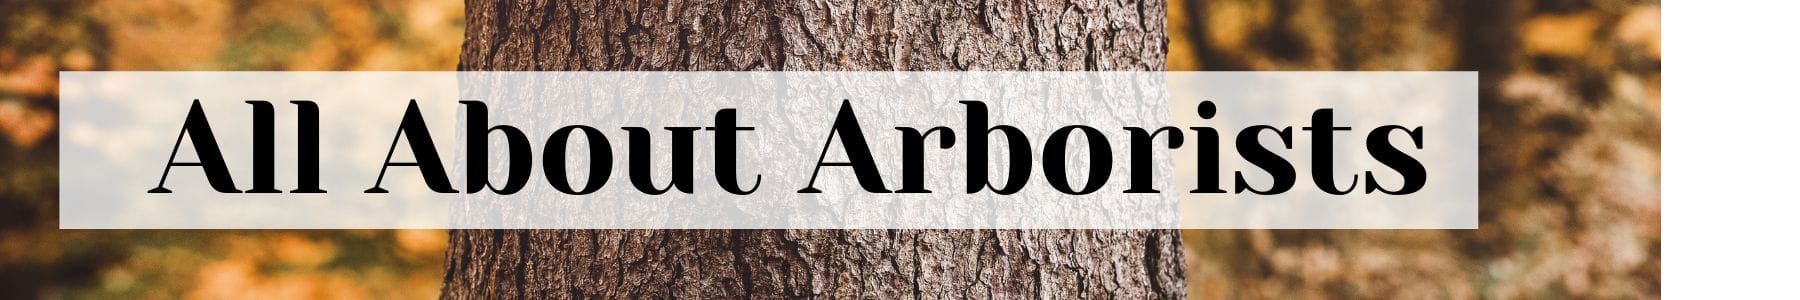 all about arborists urban forest pro